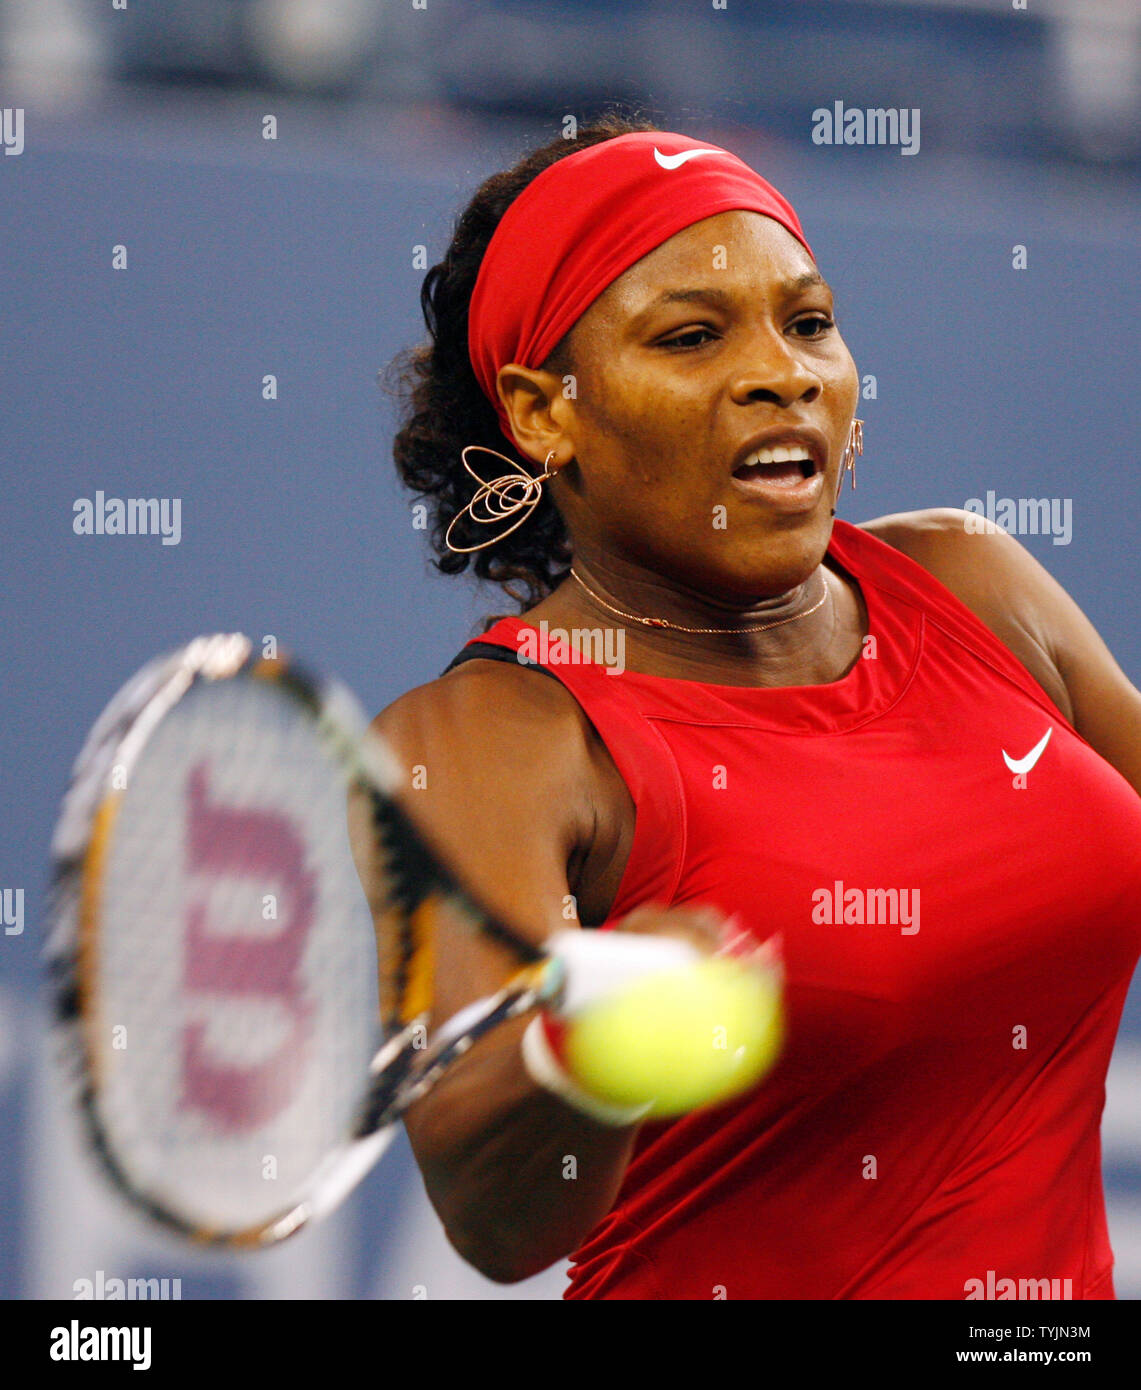 Serena Williams hits a forehand in her match against Severine Bremond on day eight at the U.S. Open Tennis Championships at the U.S. National Tennis Center in Flushing Meadows, New York on September 1, 2008. Williams defeated Bremond 6-2 6-2.        (UPI Photo/John Angelillo) Stock Photo